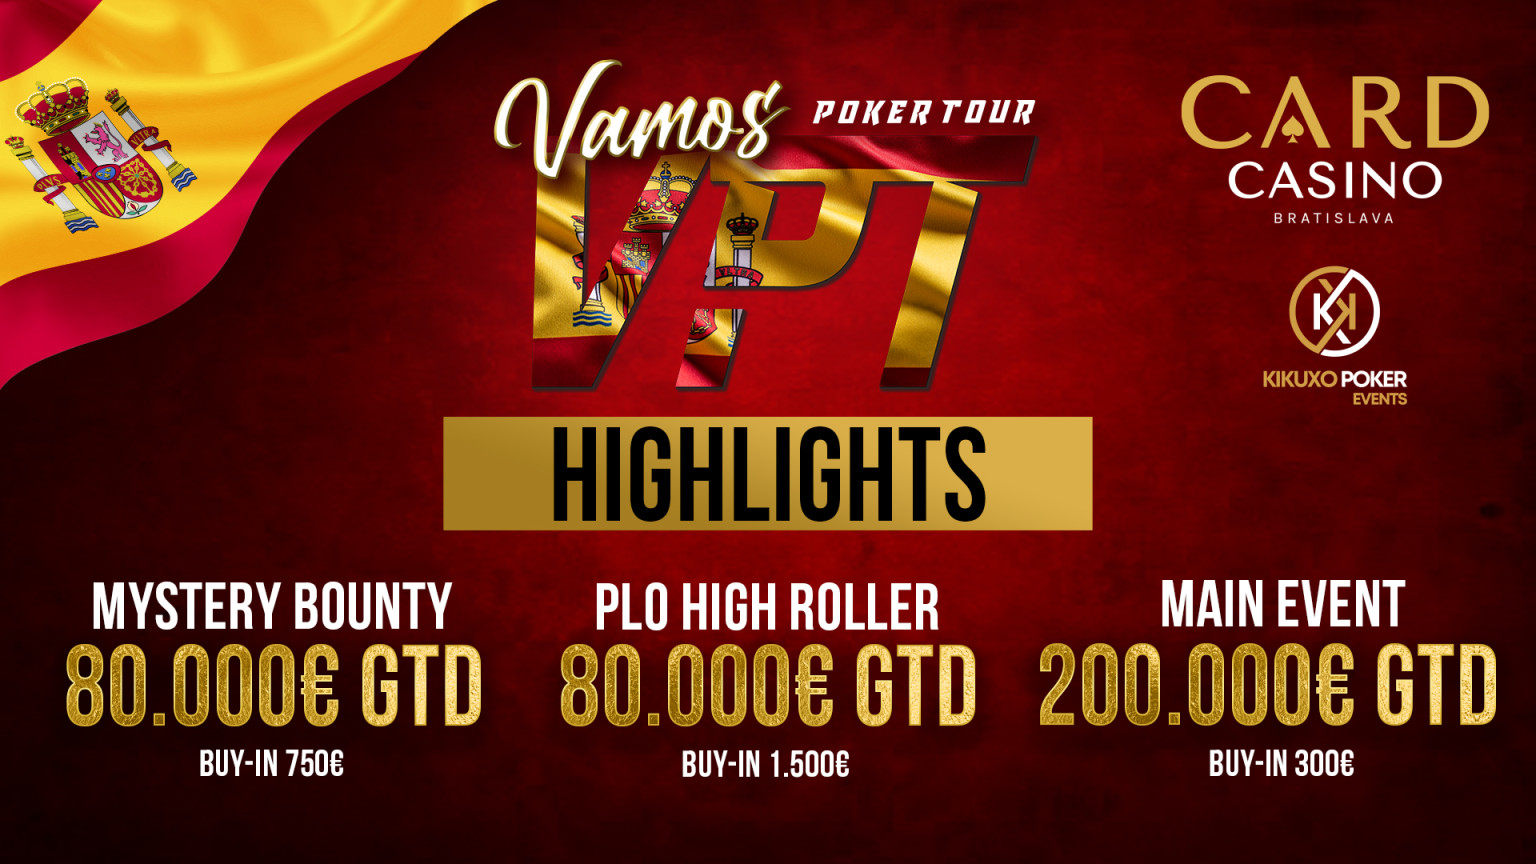 The Vamos Poker Tour starts today with a €400,000 guarantee